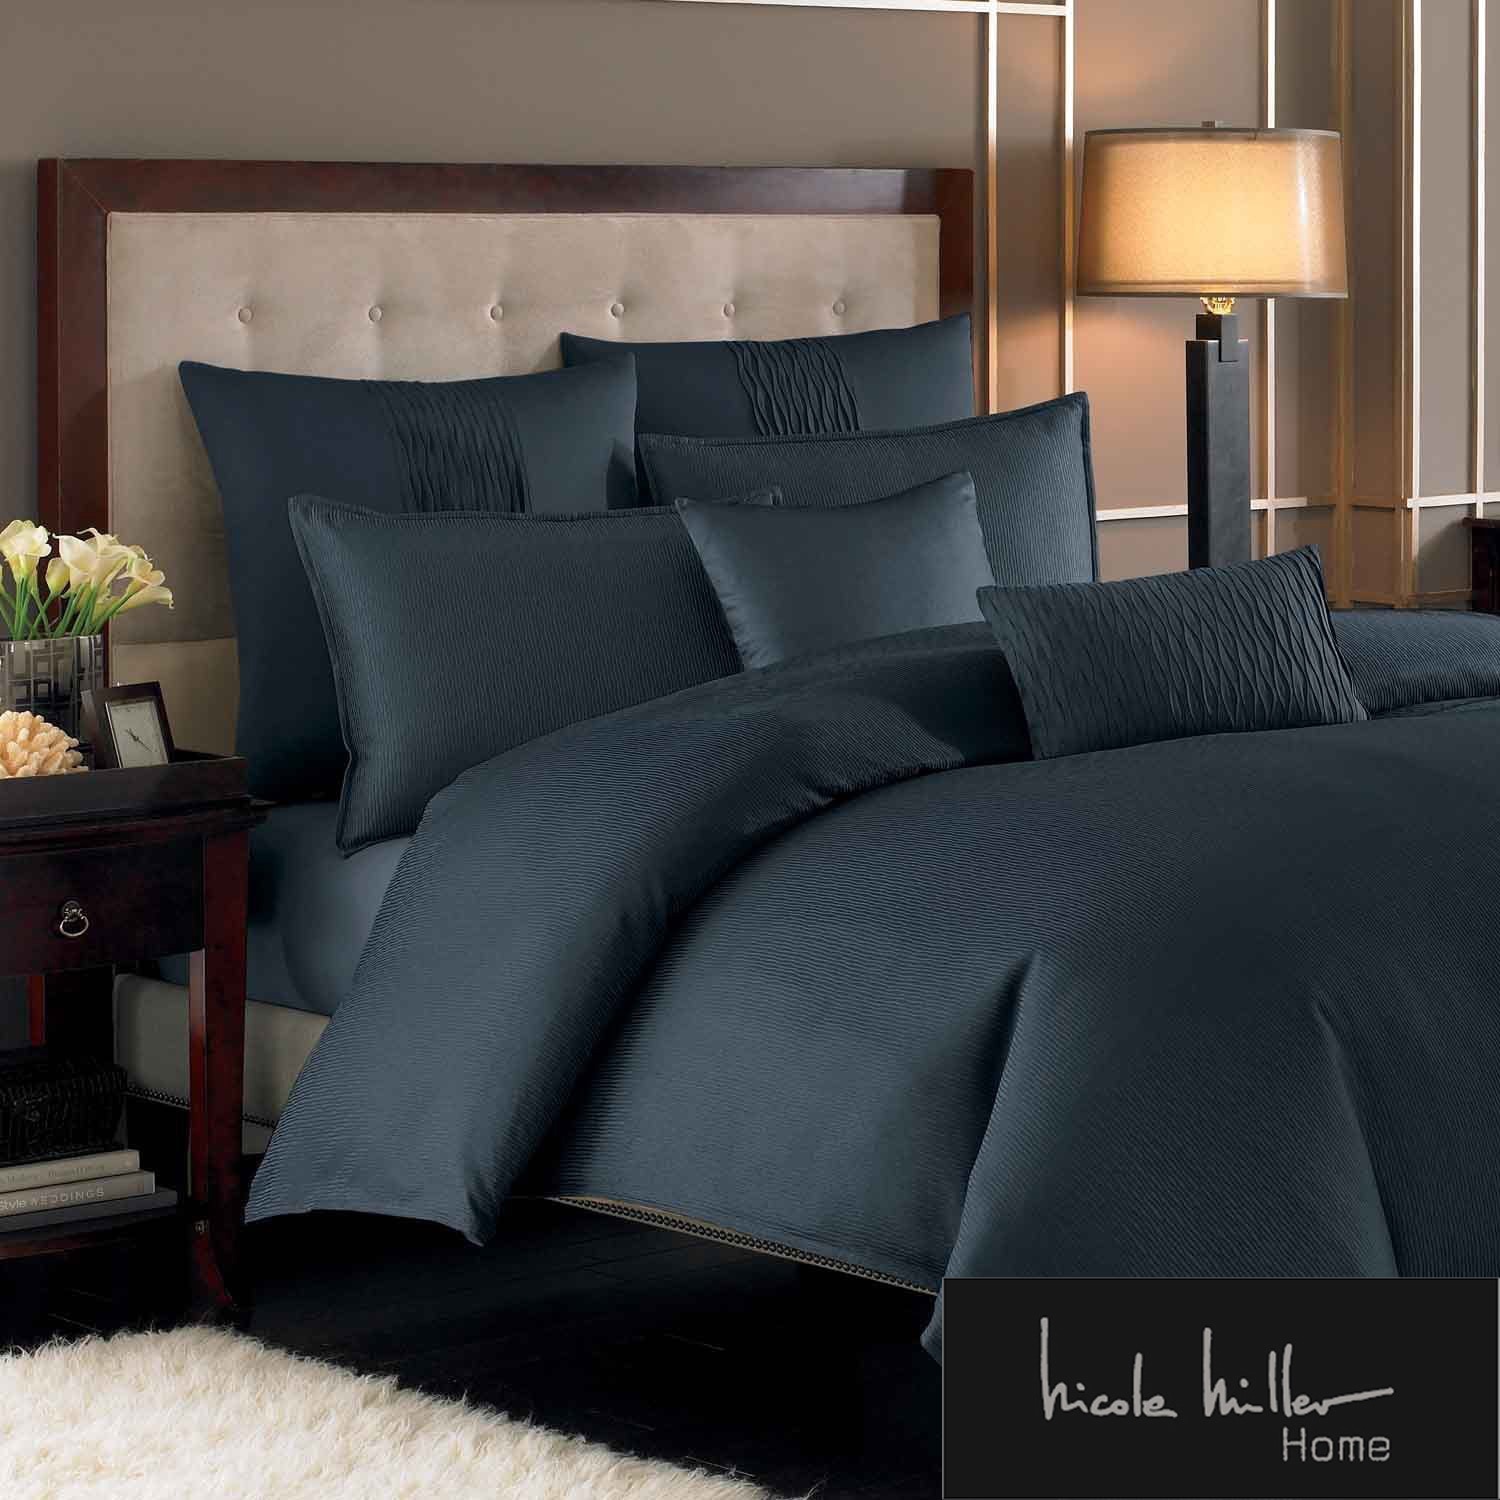 Nicole Miller Currents Ink Duvet Cover And Sham Separates